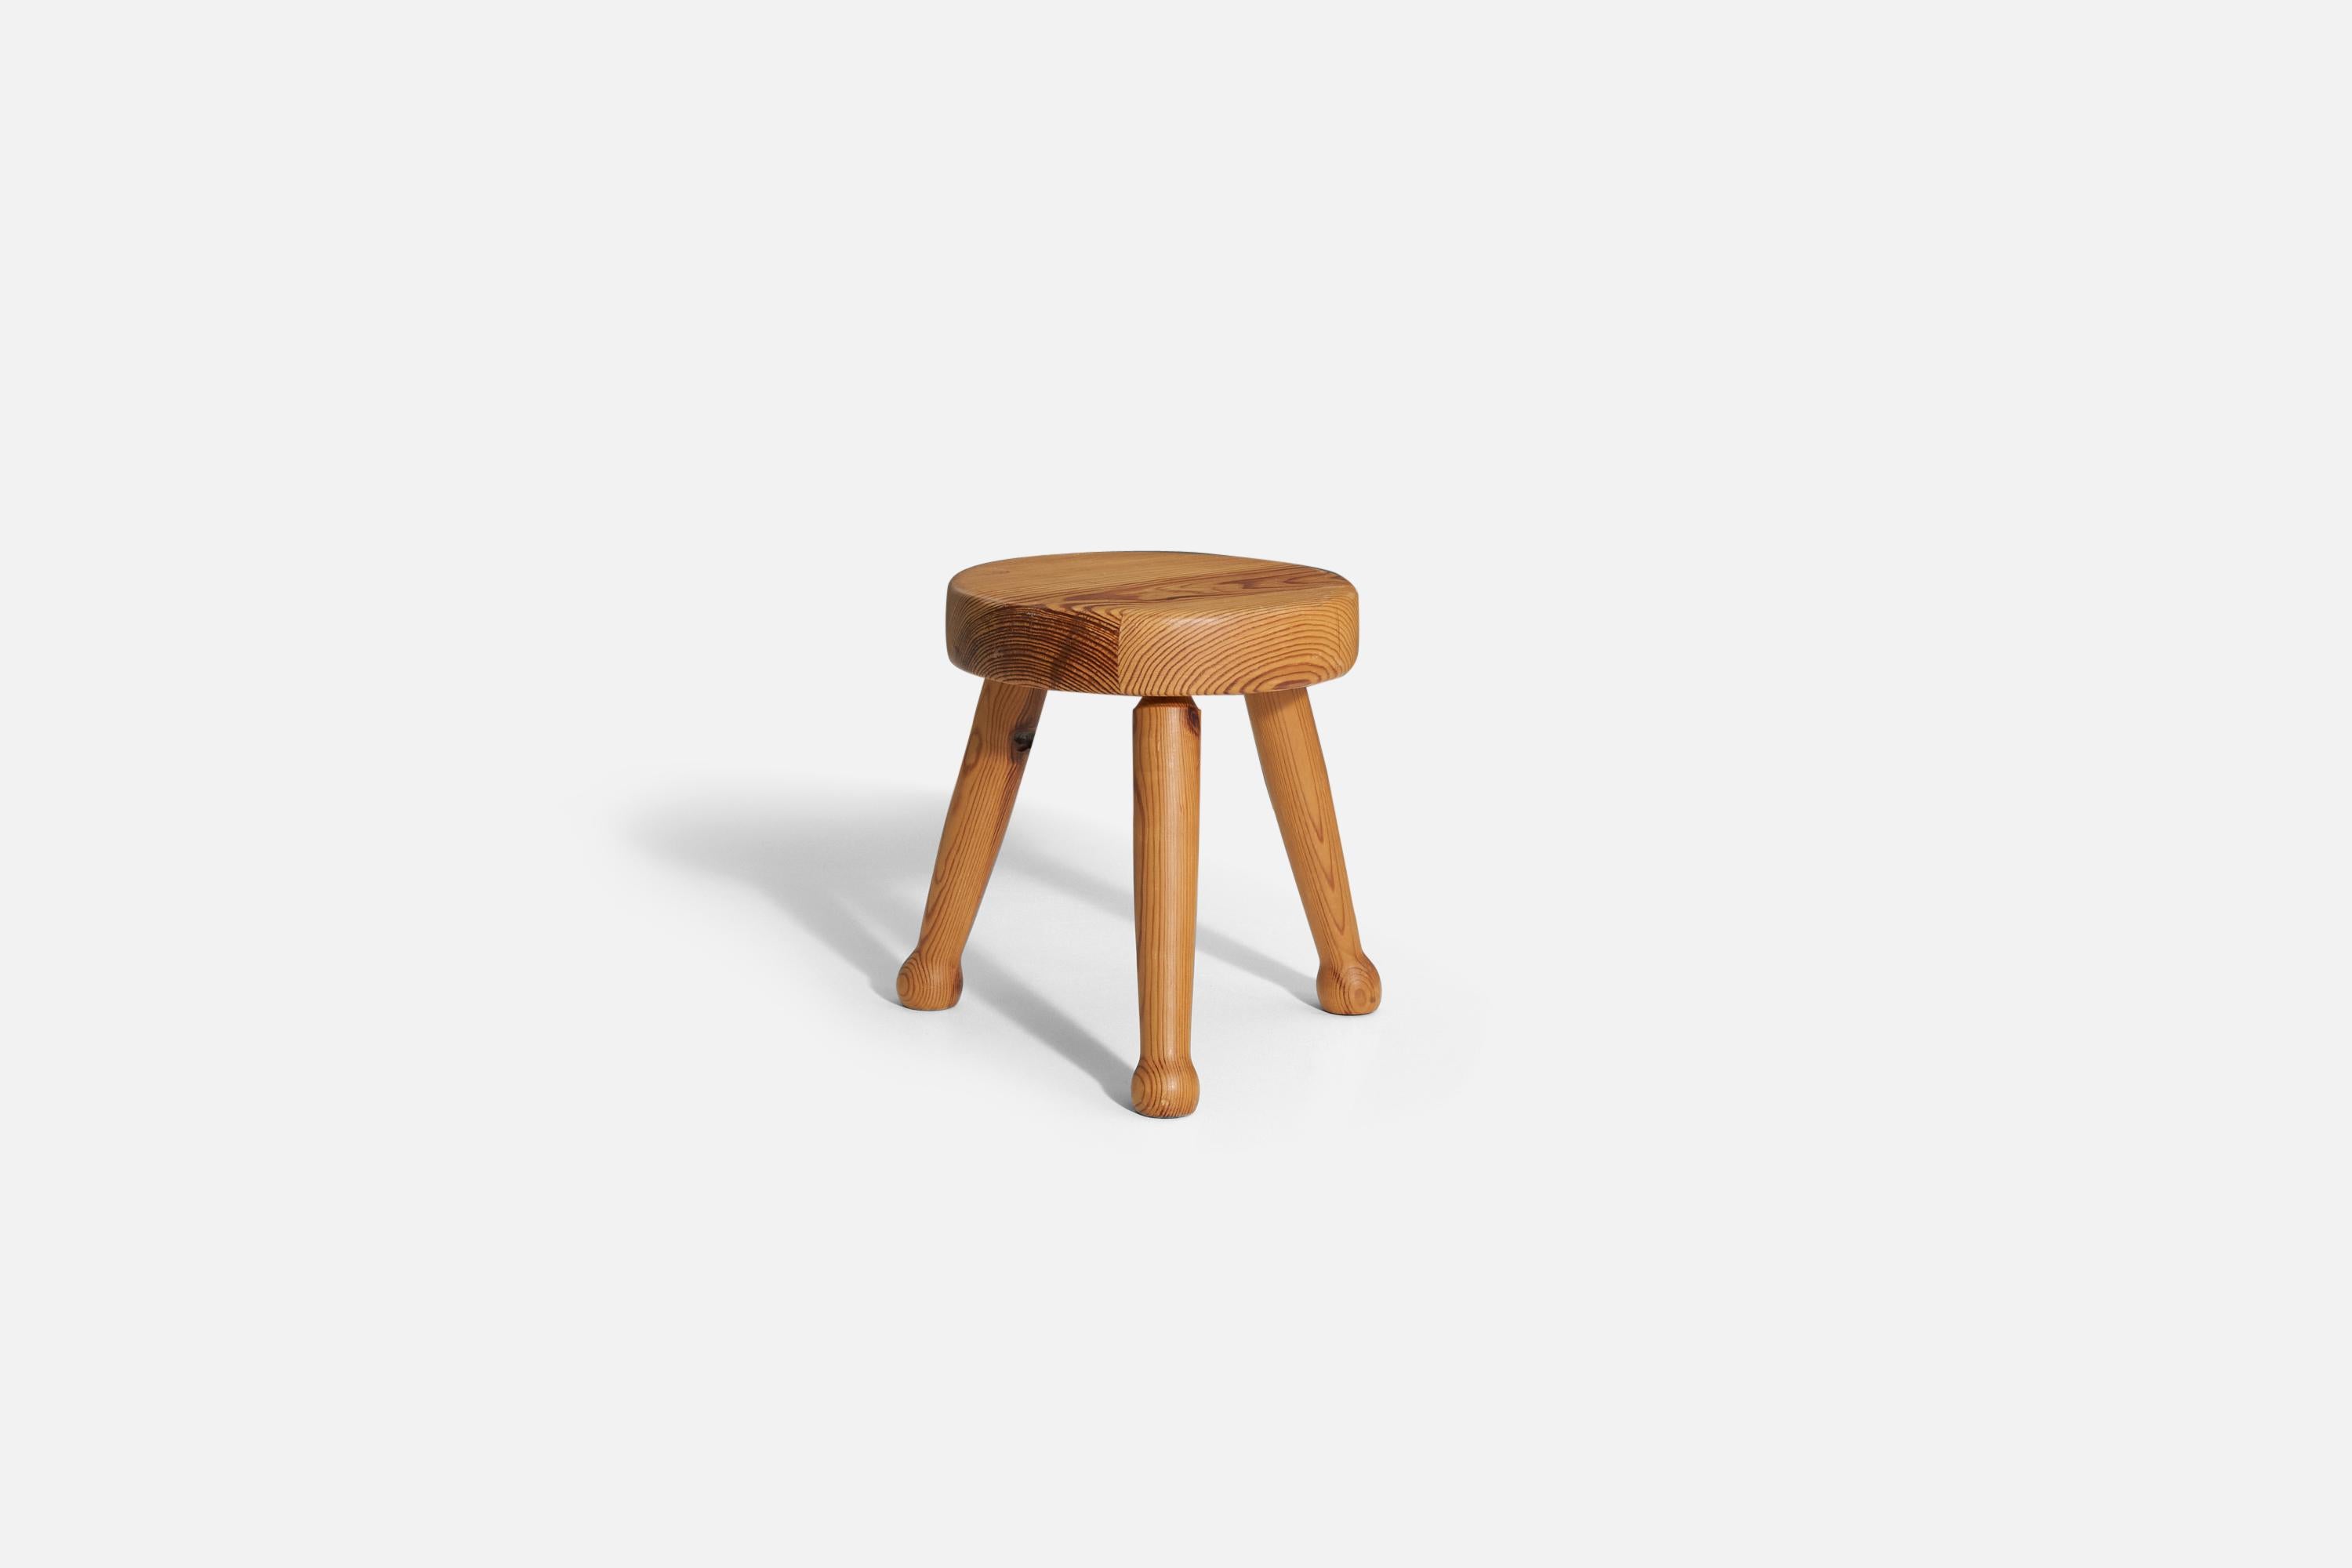 A solid pine stool, produced by a Swedish designer, Sweden, c. 1970s.